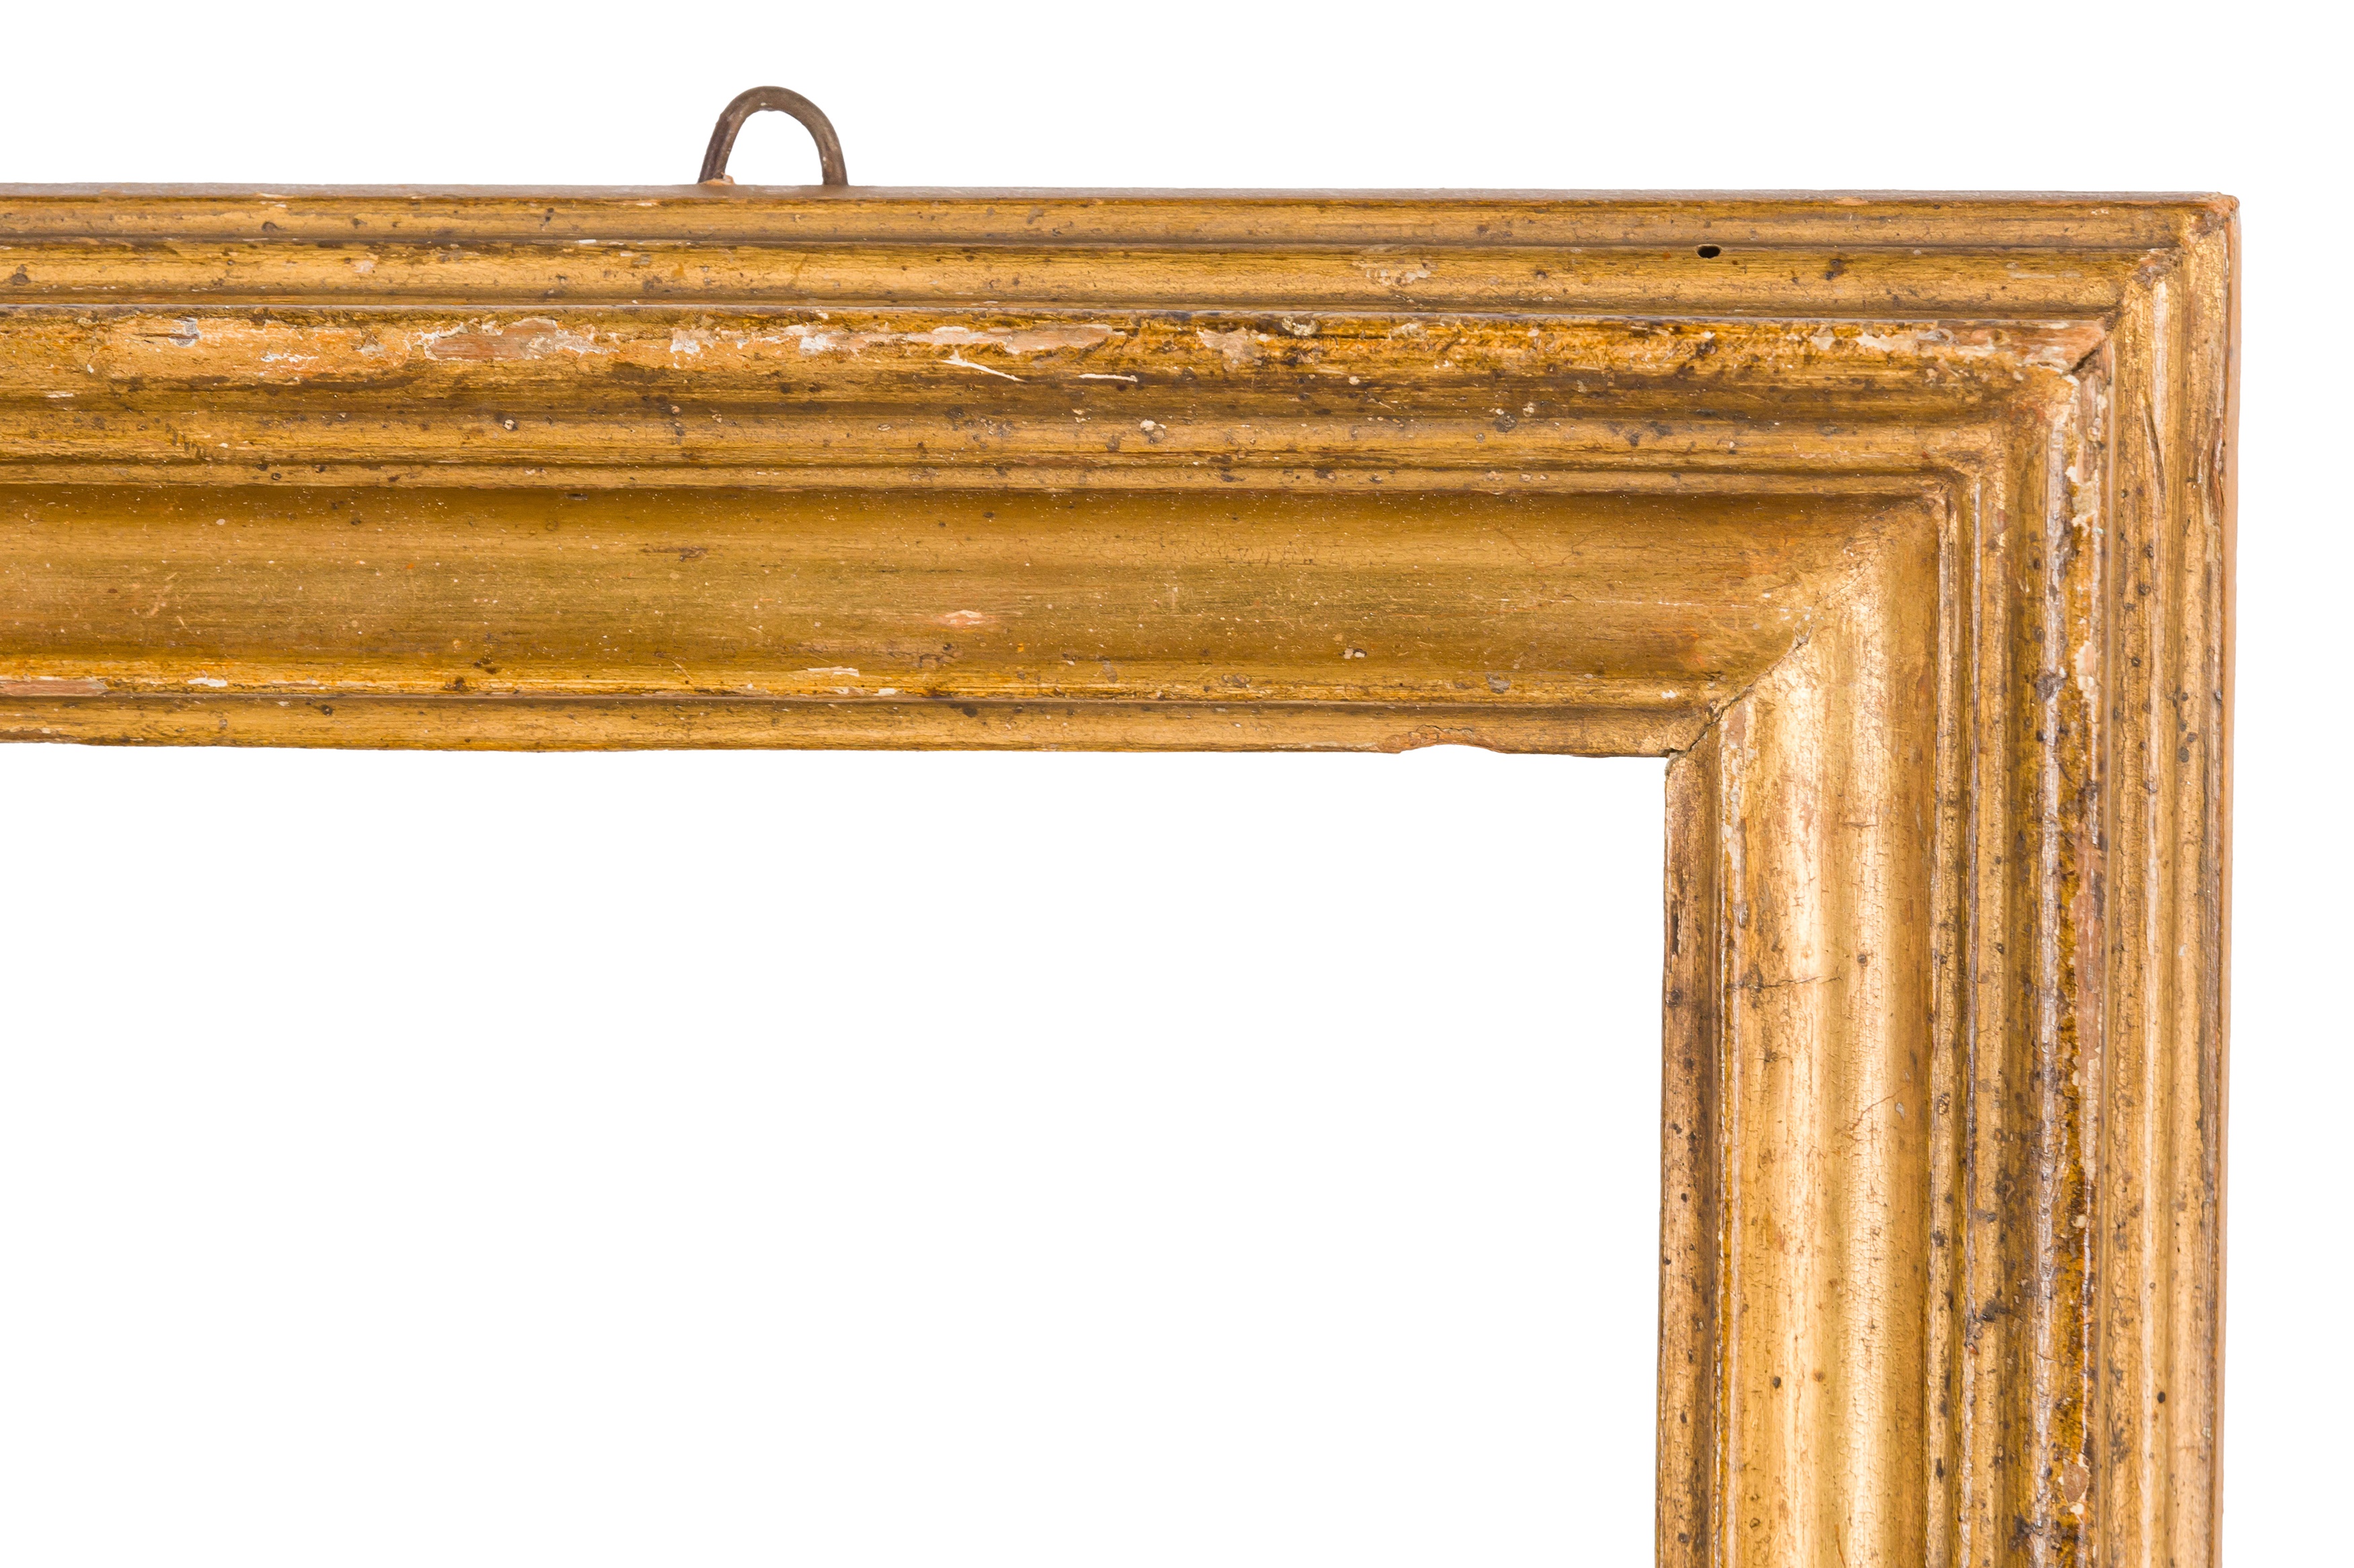 AN ITALIAN 18TH CENTURY SALVATOR ROSA GILDED MOULDING FRAME - Image 2 of 4